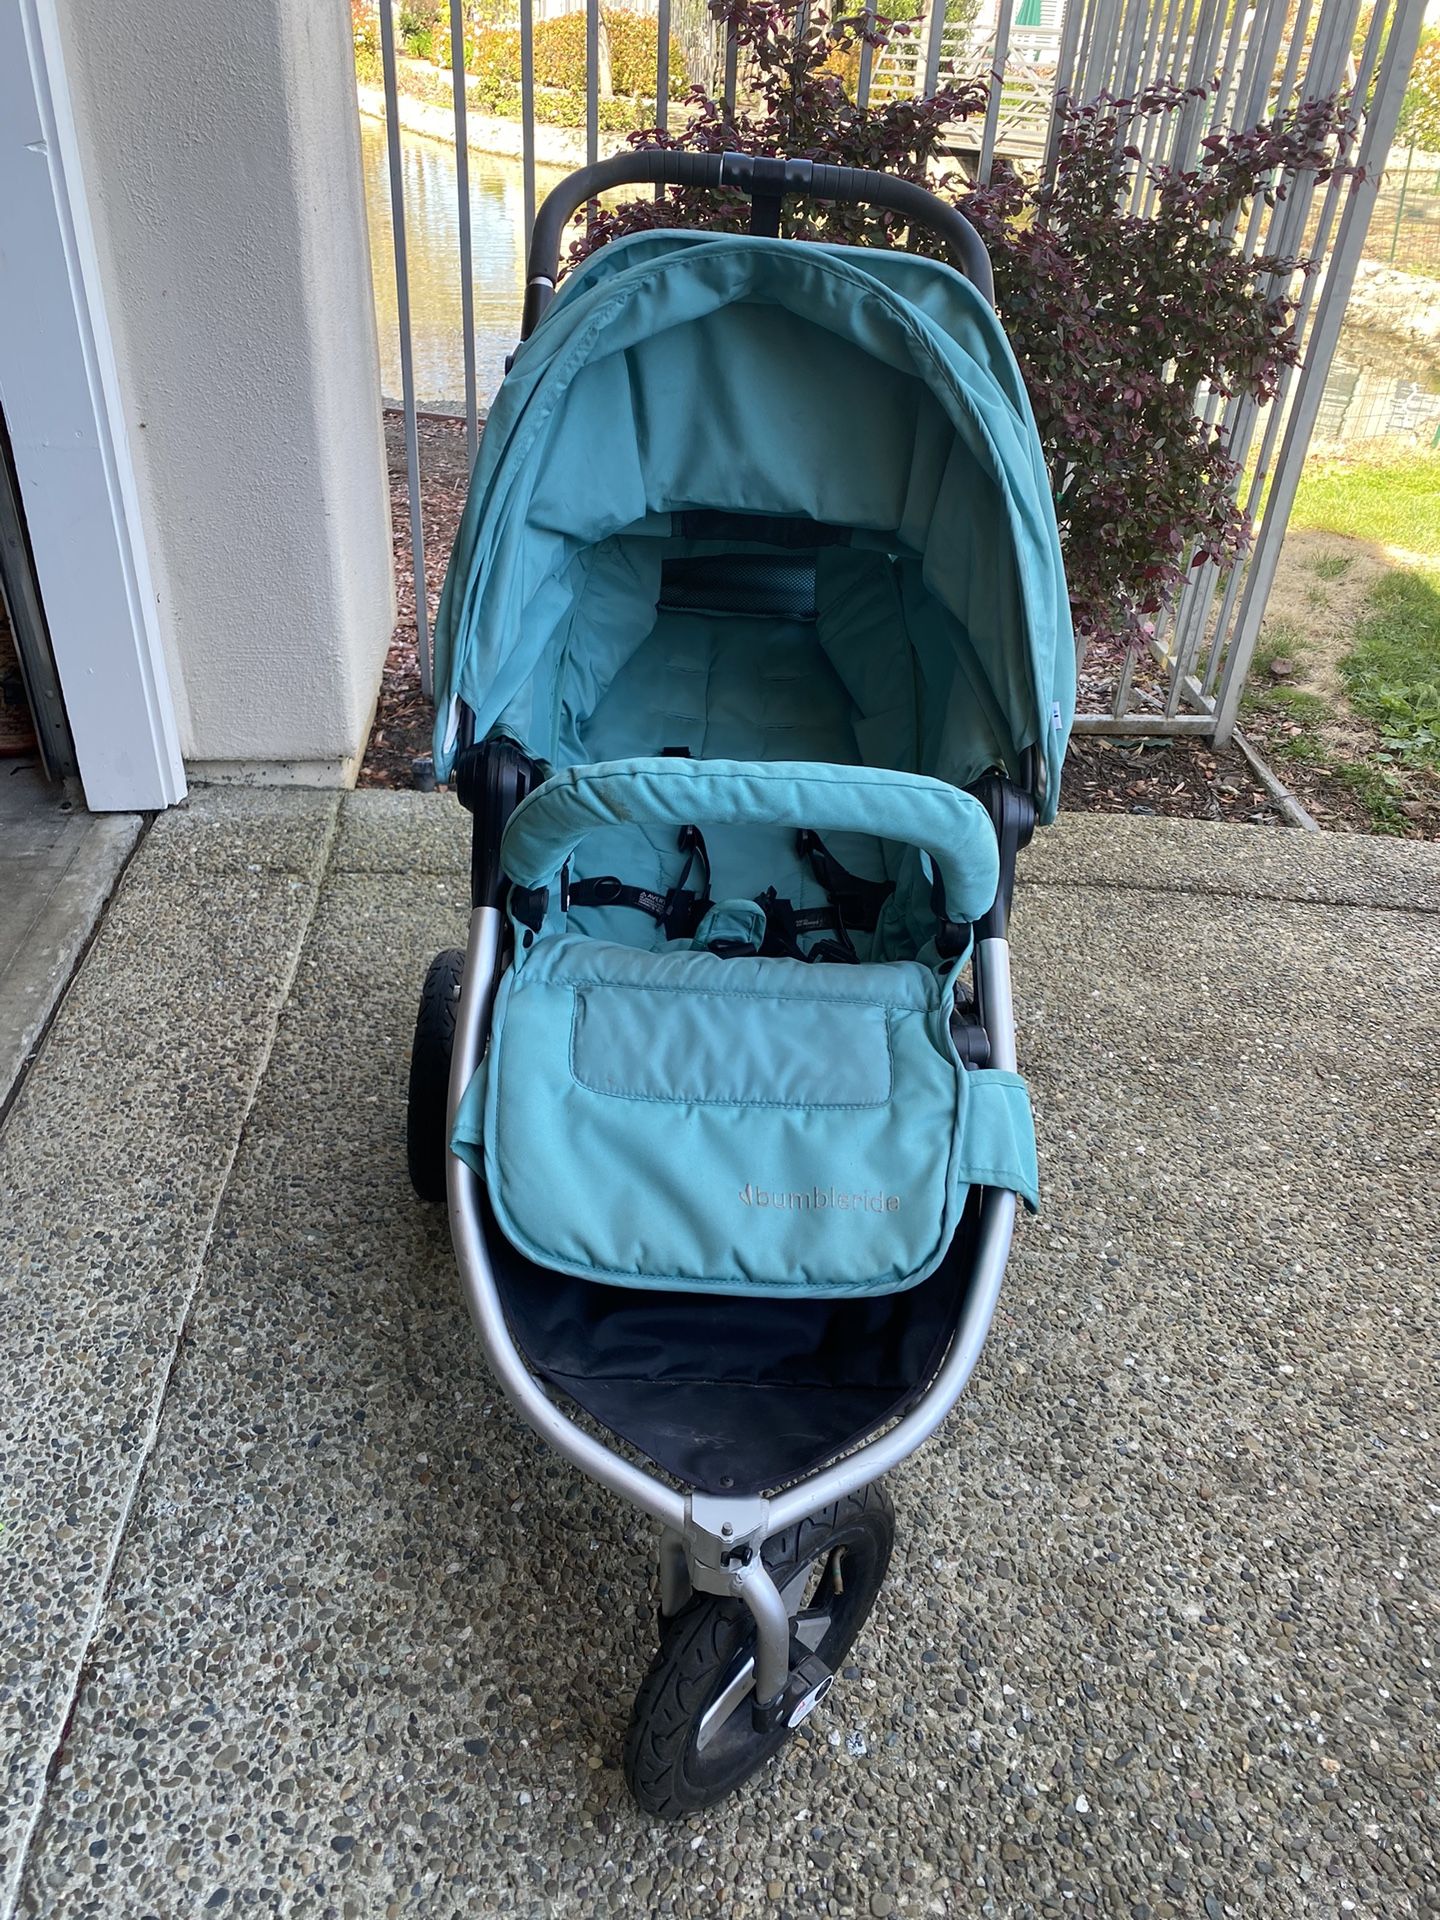 Pottery Barn Bumbleride Stroller For Sale